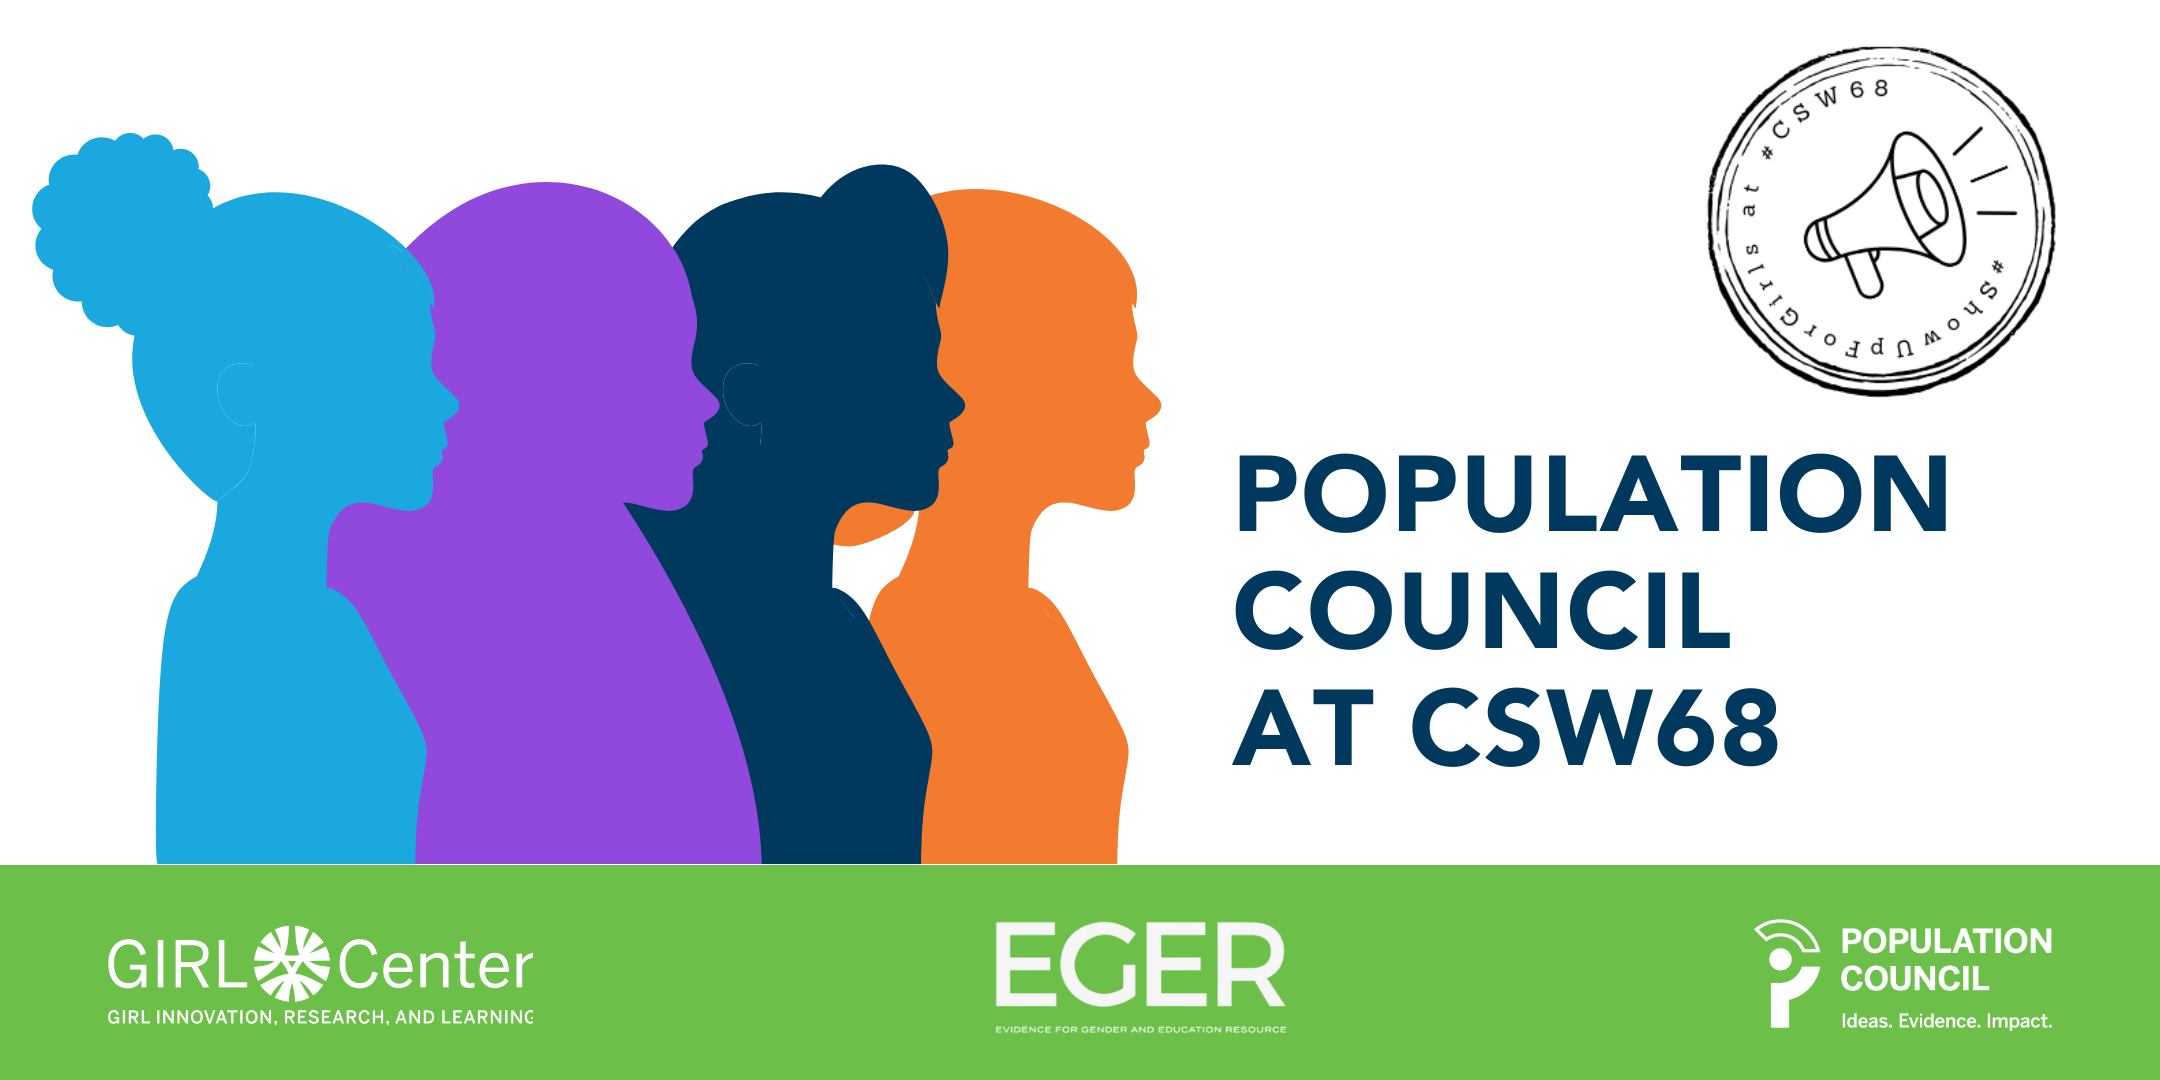 Population Council at CSW68